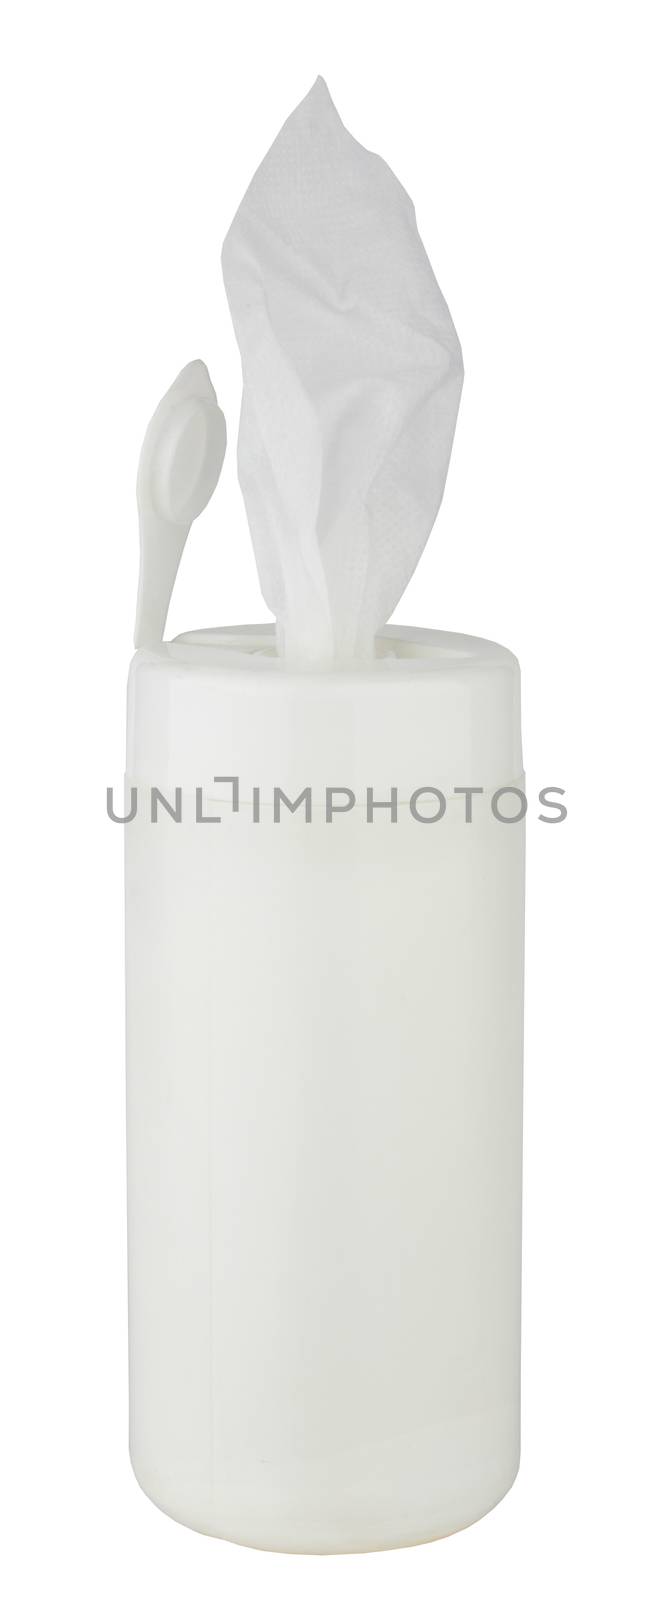 Tissue box of cleaning napkins isolated over white background